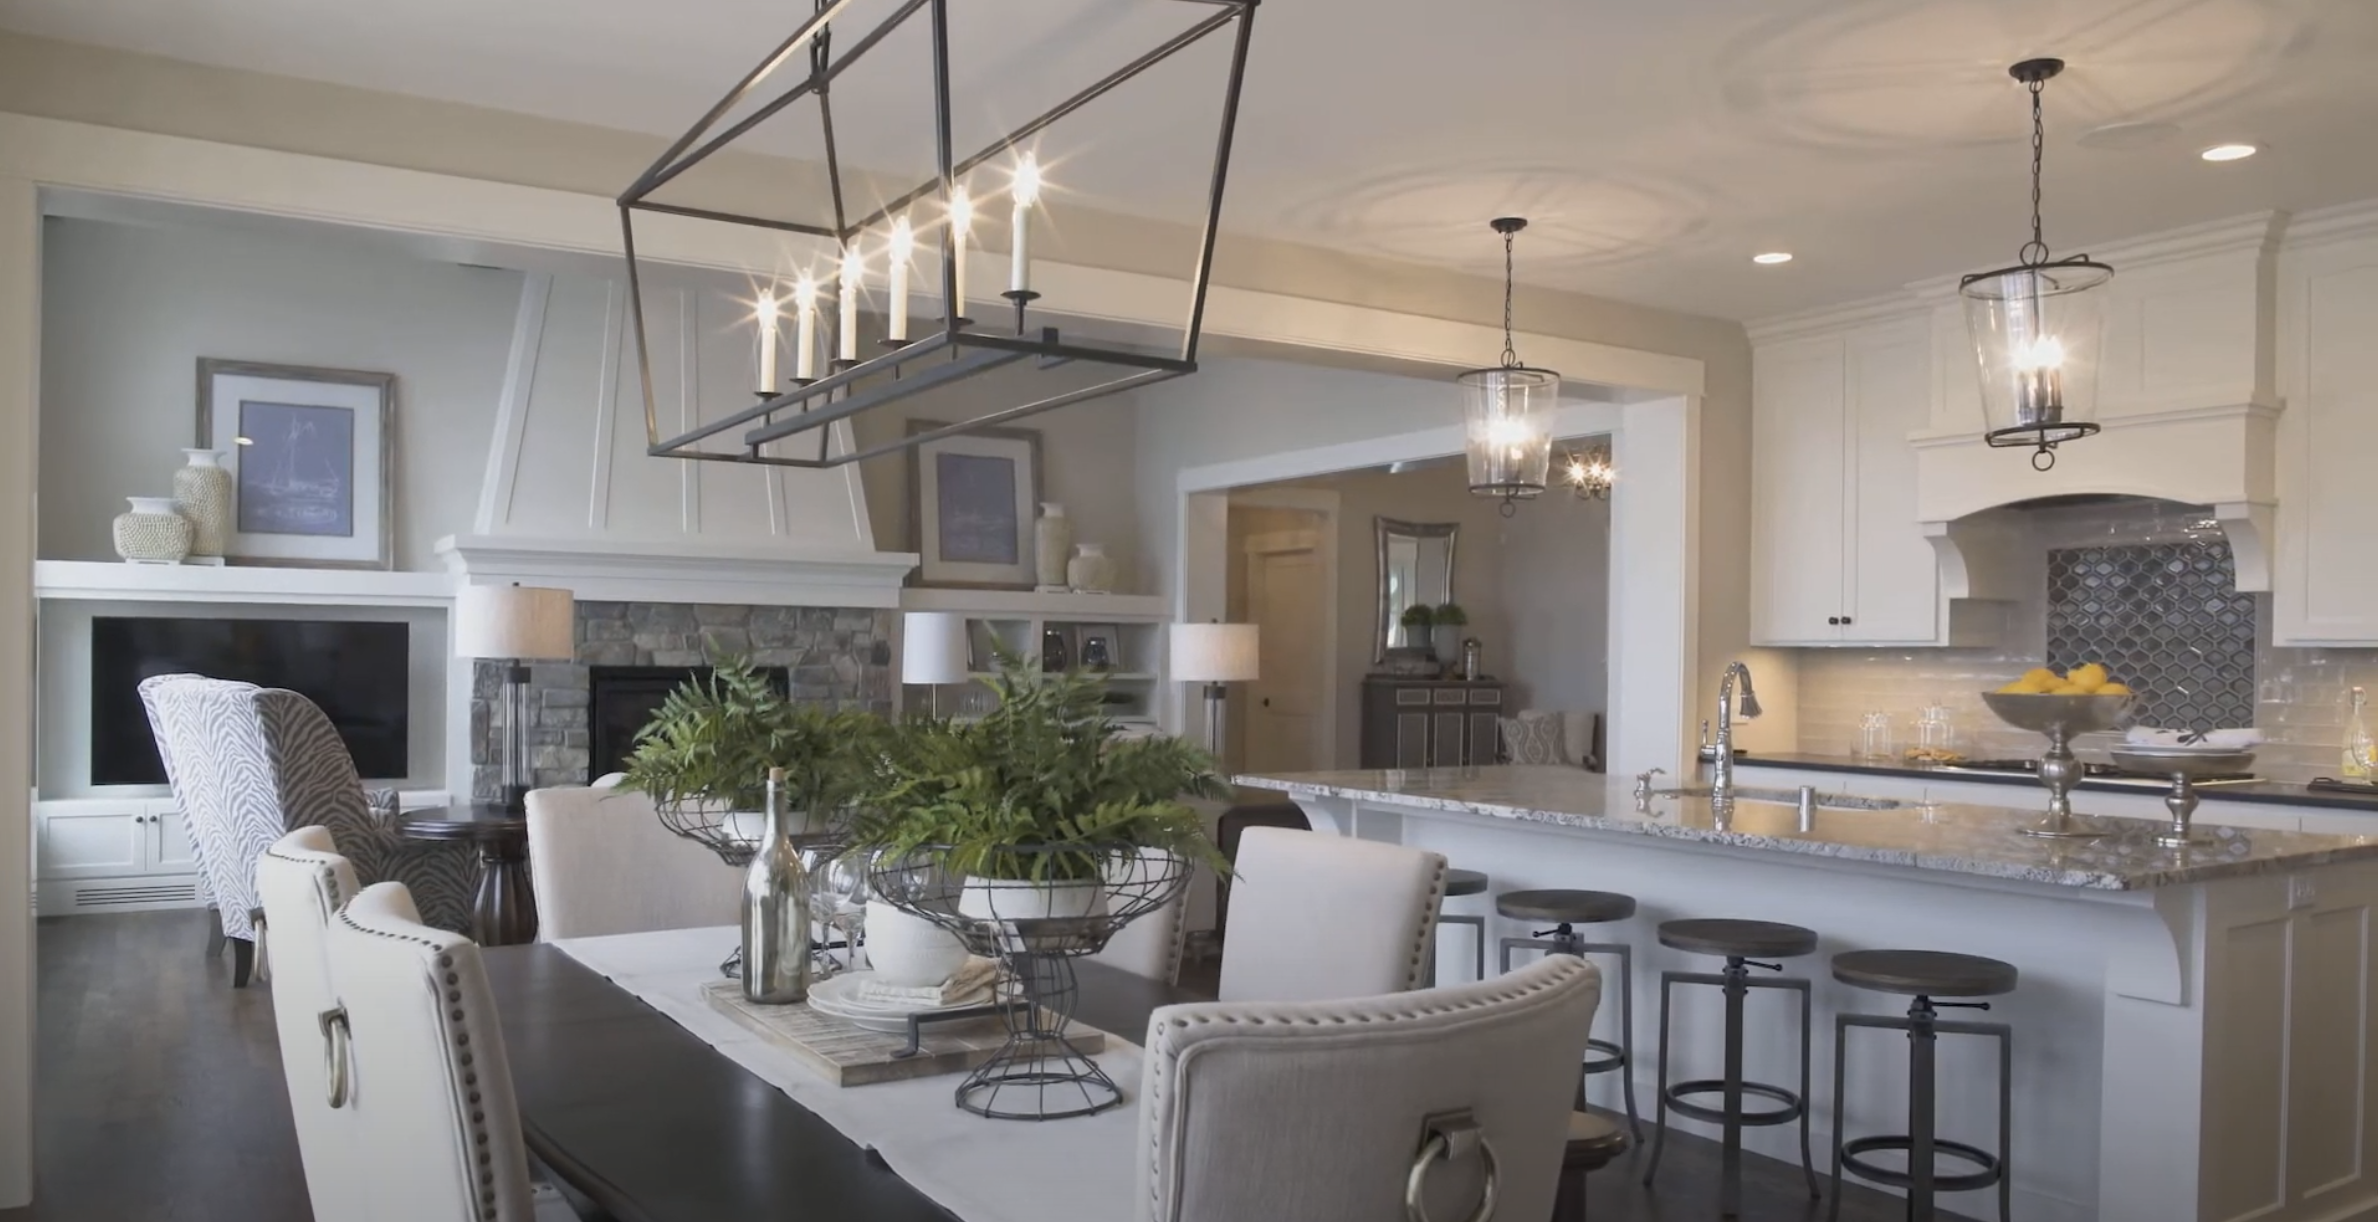 A large kitchen with a dining table and chairs is featured in this Custom Home Build Video Series.